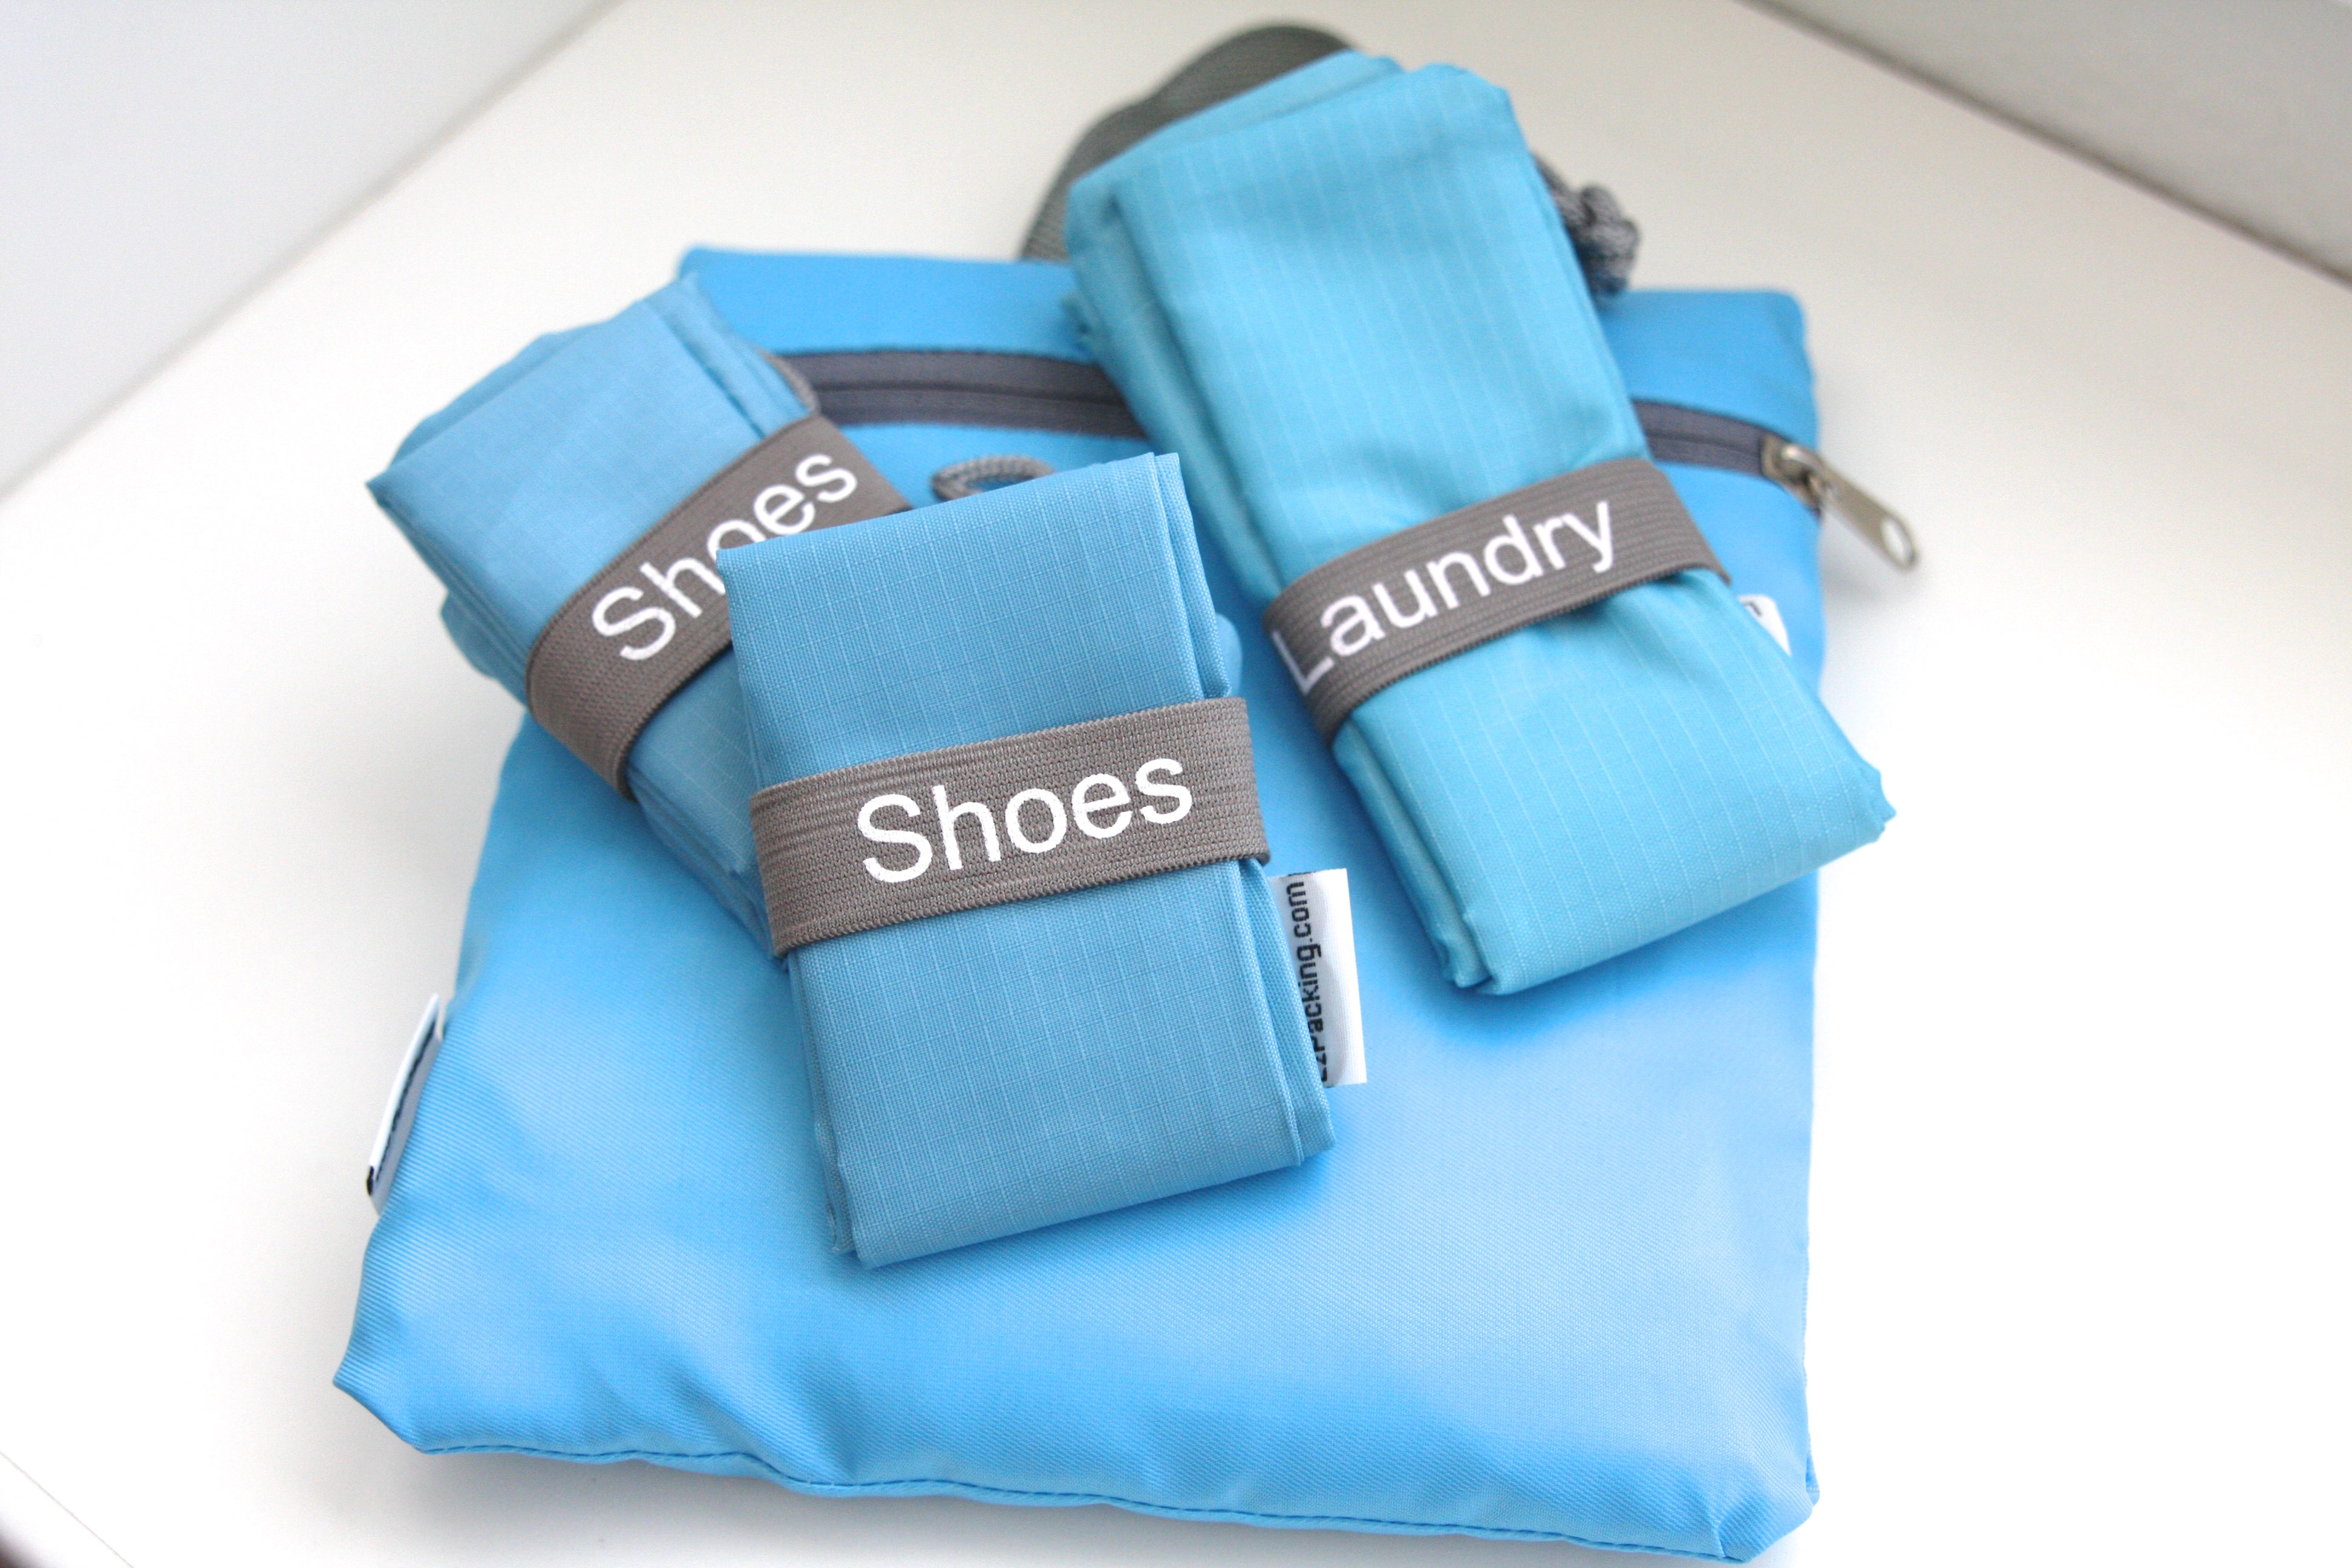 Travel laundry bag and shoe bags by Junyuan